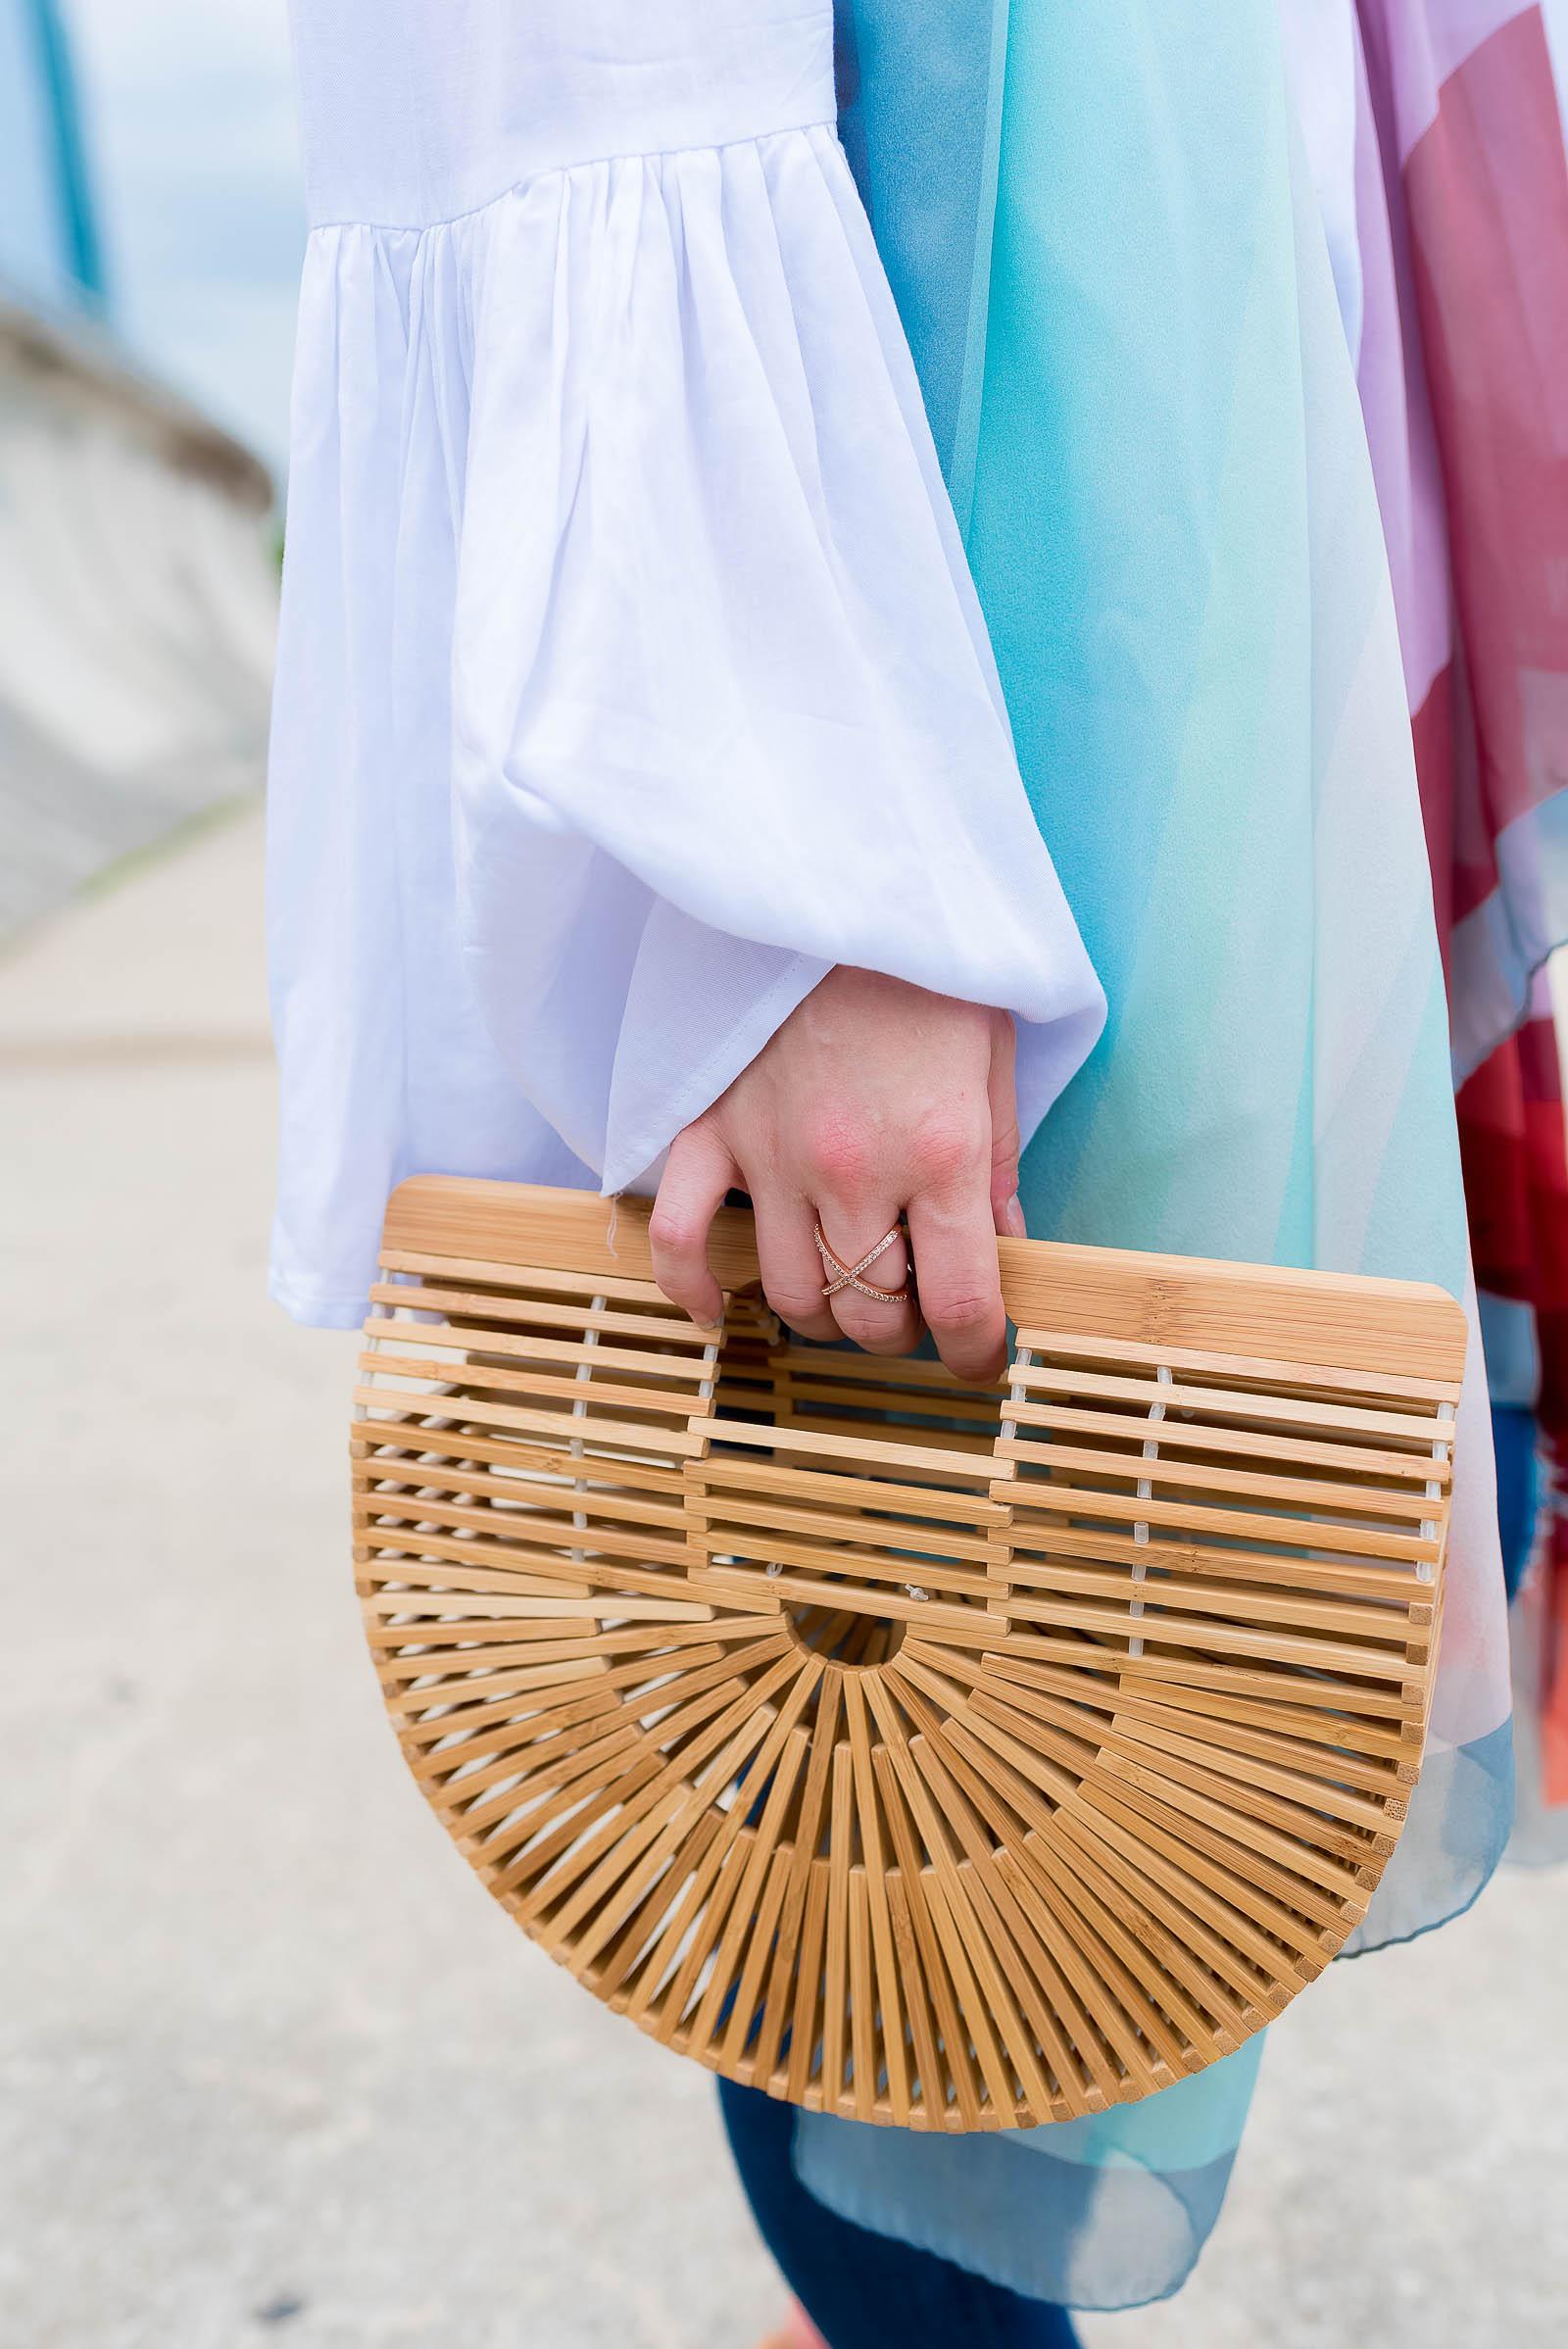 Cult Gaia Ark Bag Chic Summer Outfit